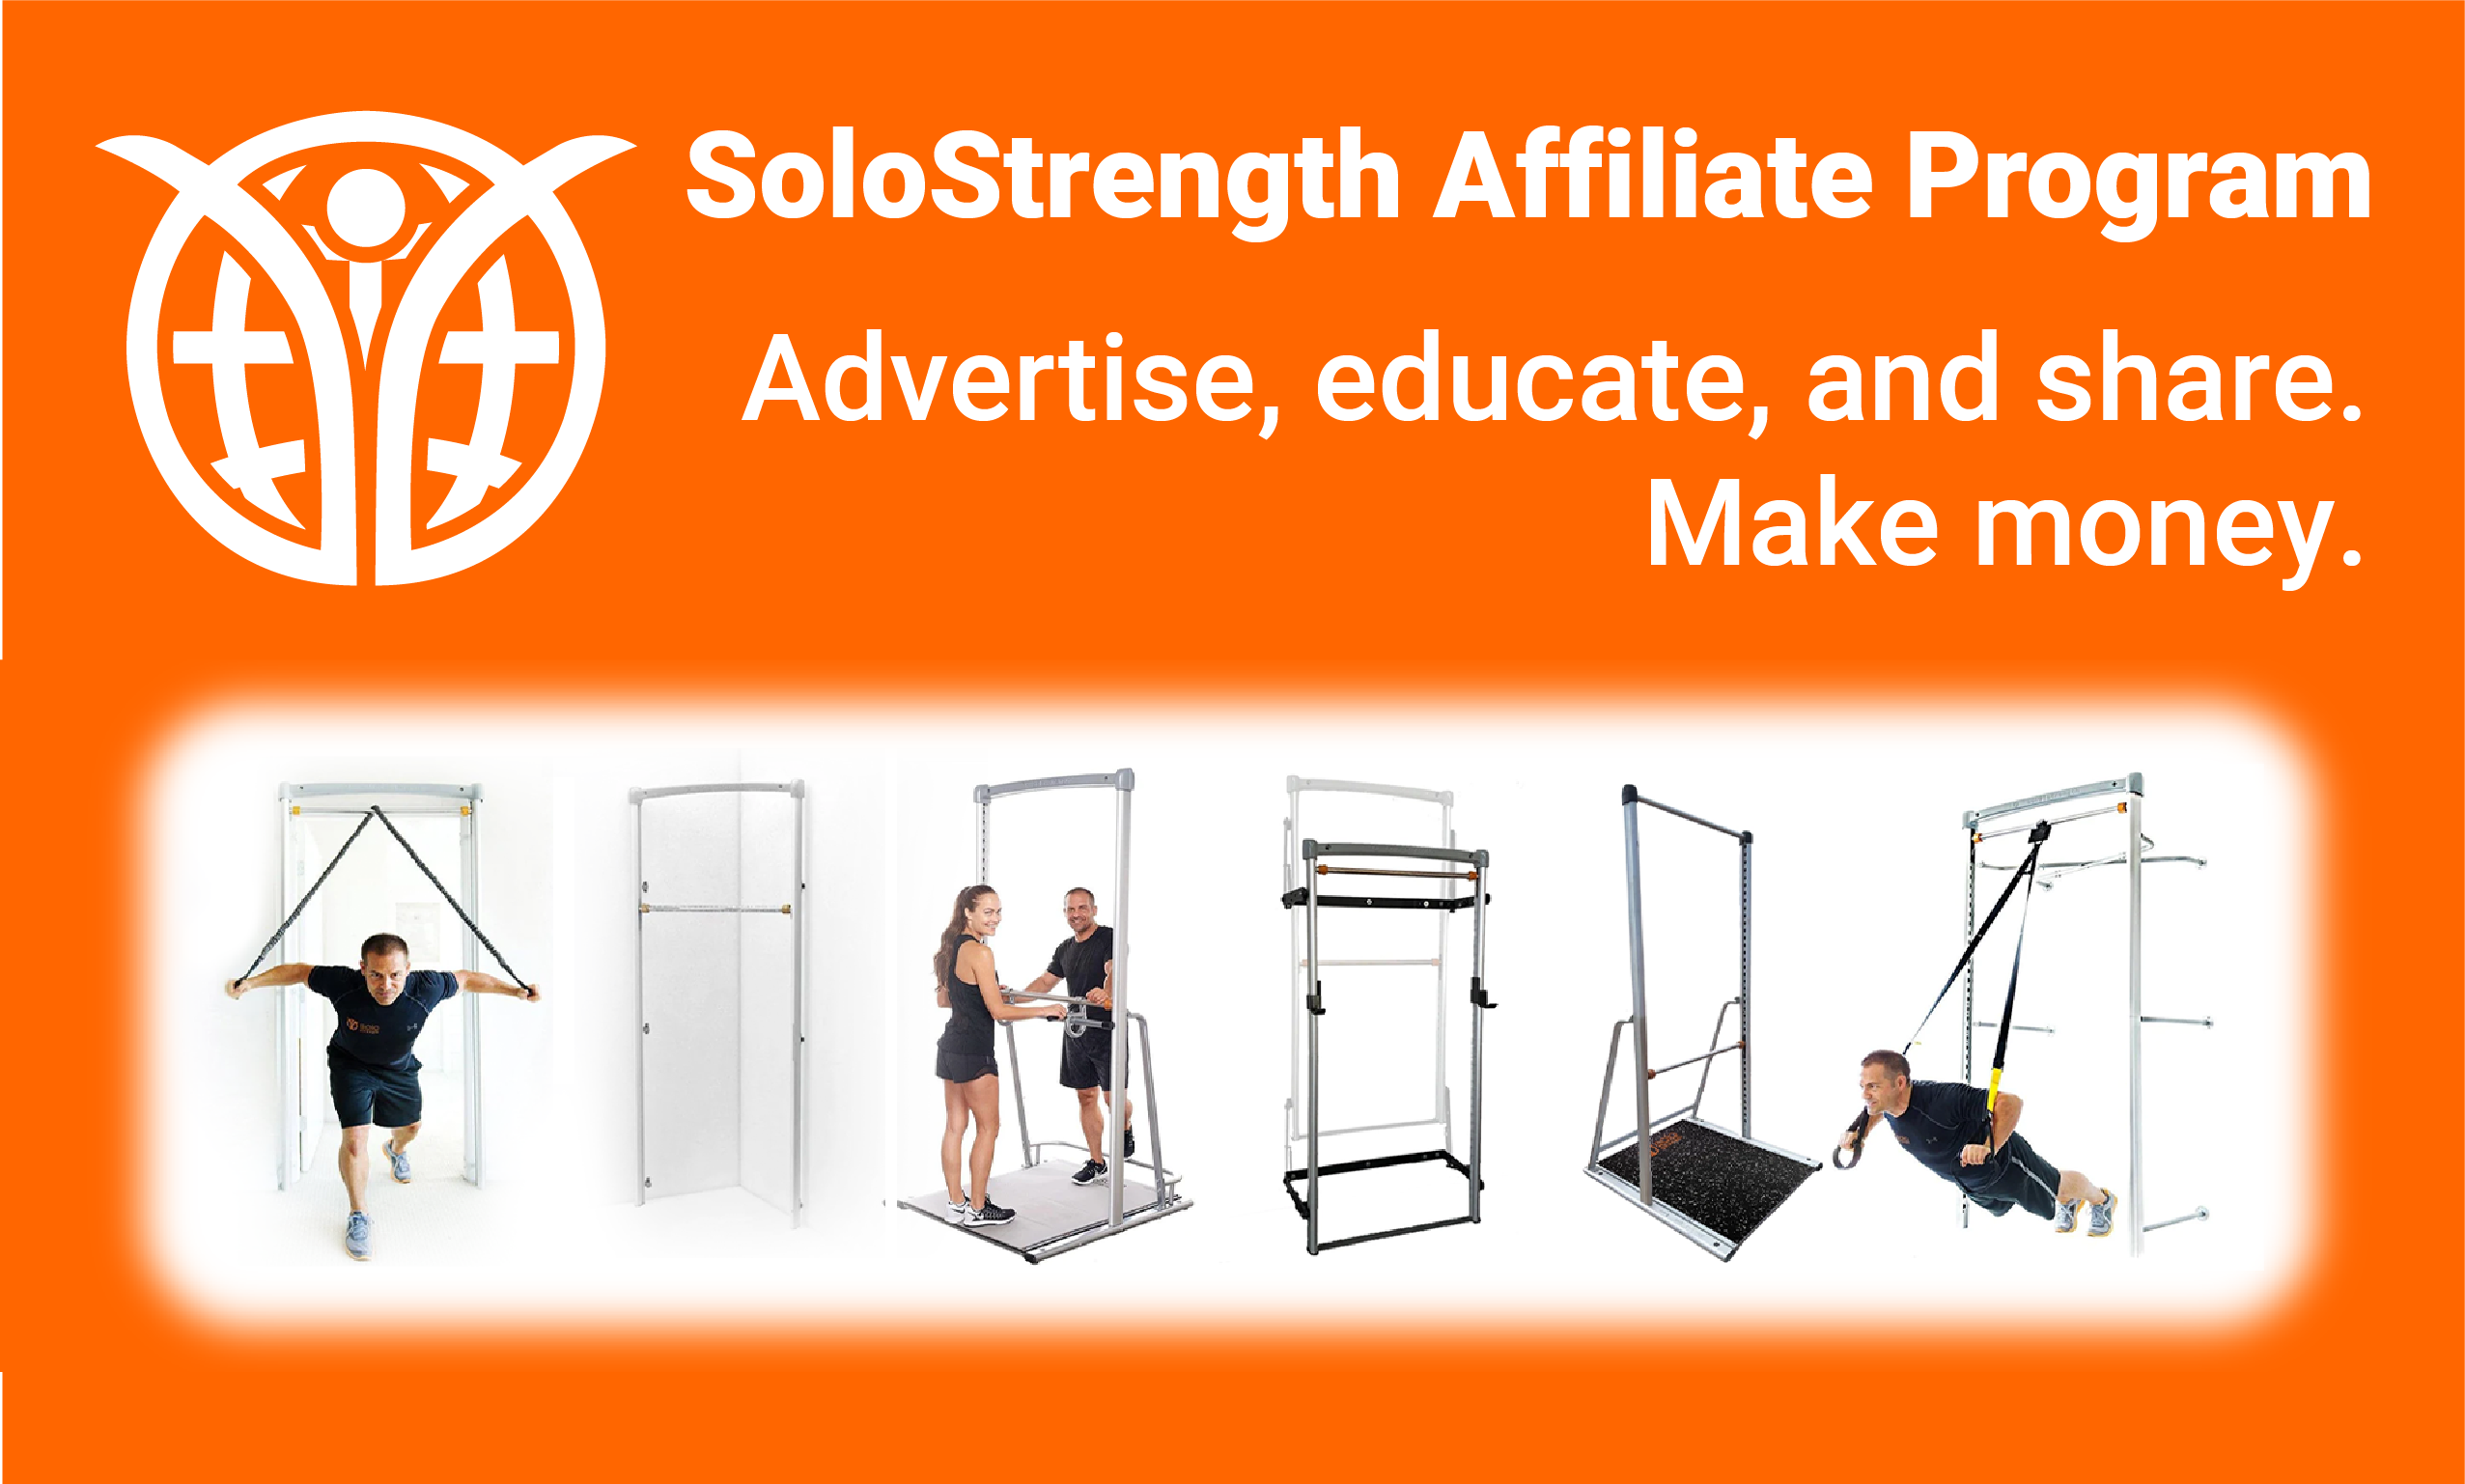 SoloStrength affiliate program for dealers and distributors come work with us!